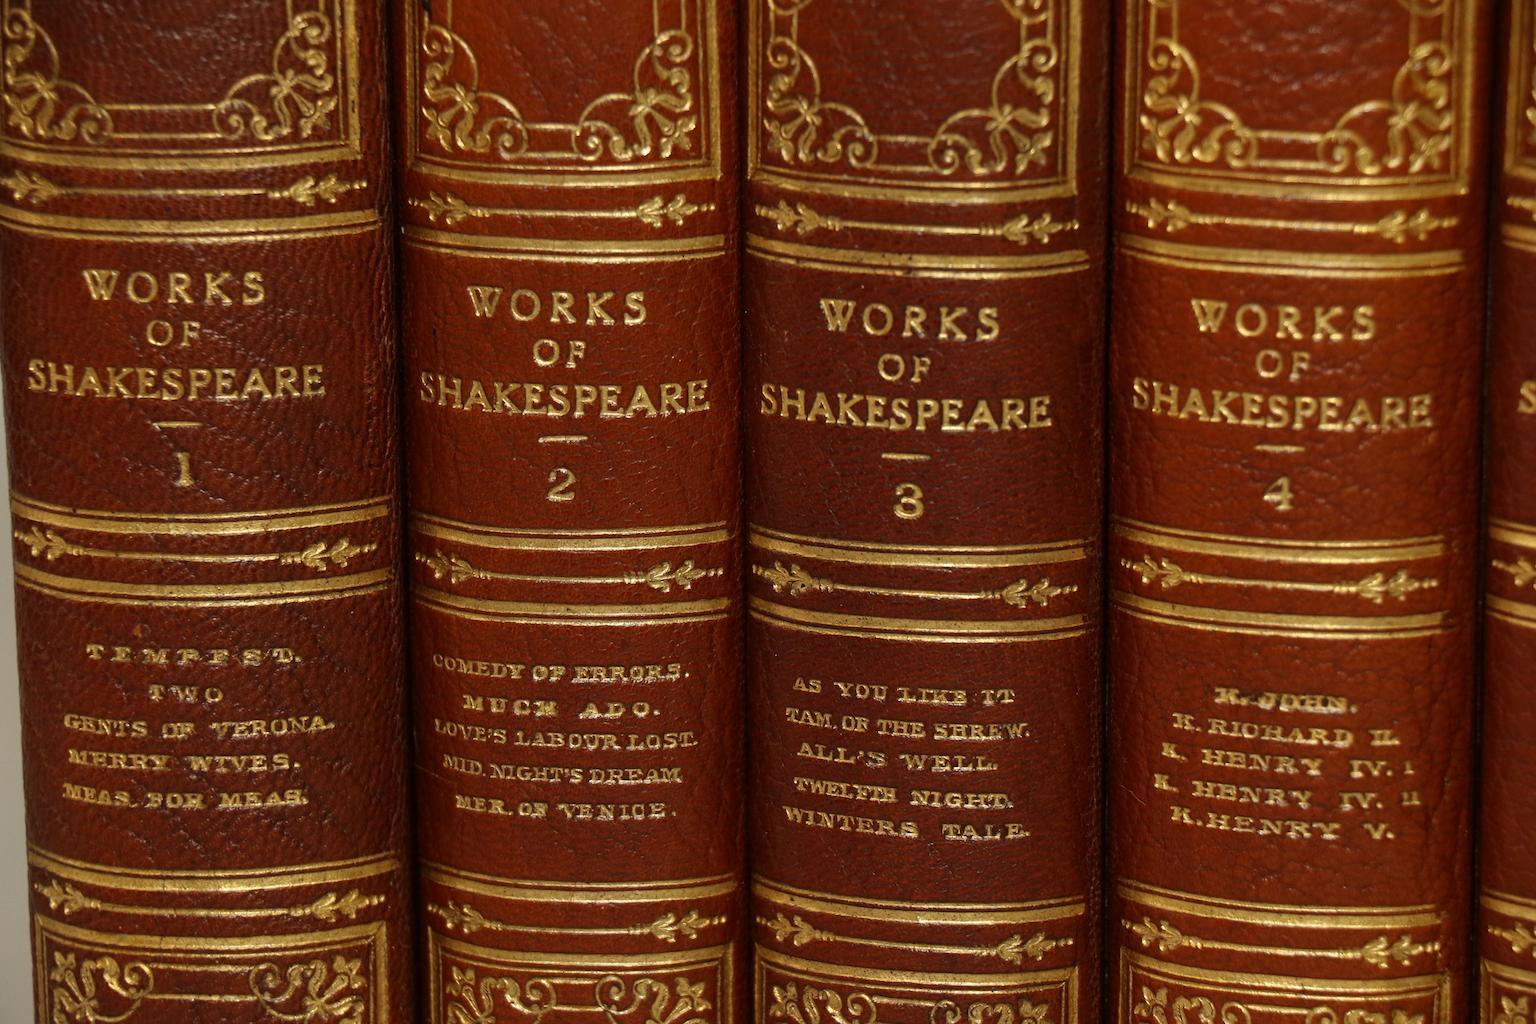 8 volumes. Bound in full tan Morocco with marbled egdes and ornate gilt on covers & spines. Very good. Published in London by Chapman and Hall in 1875.